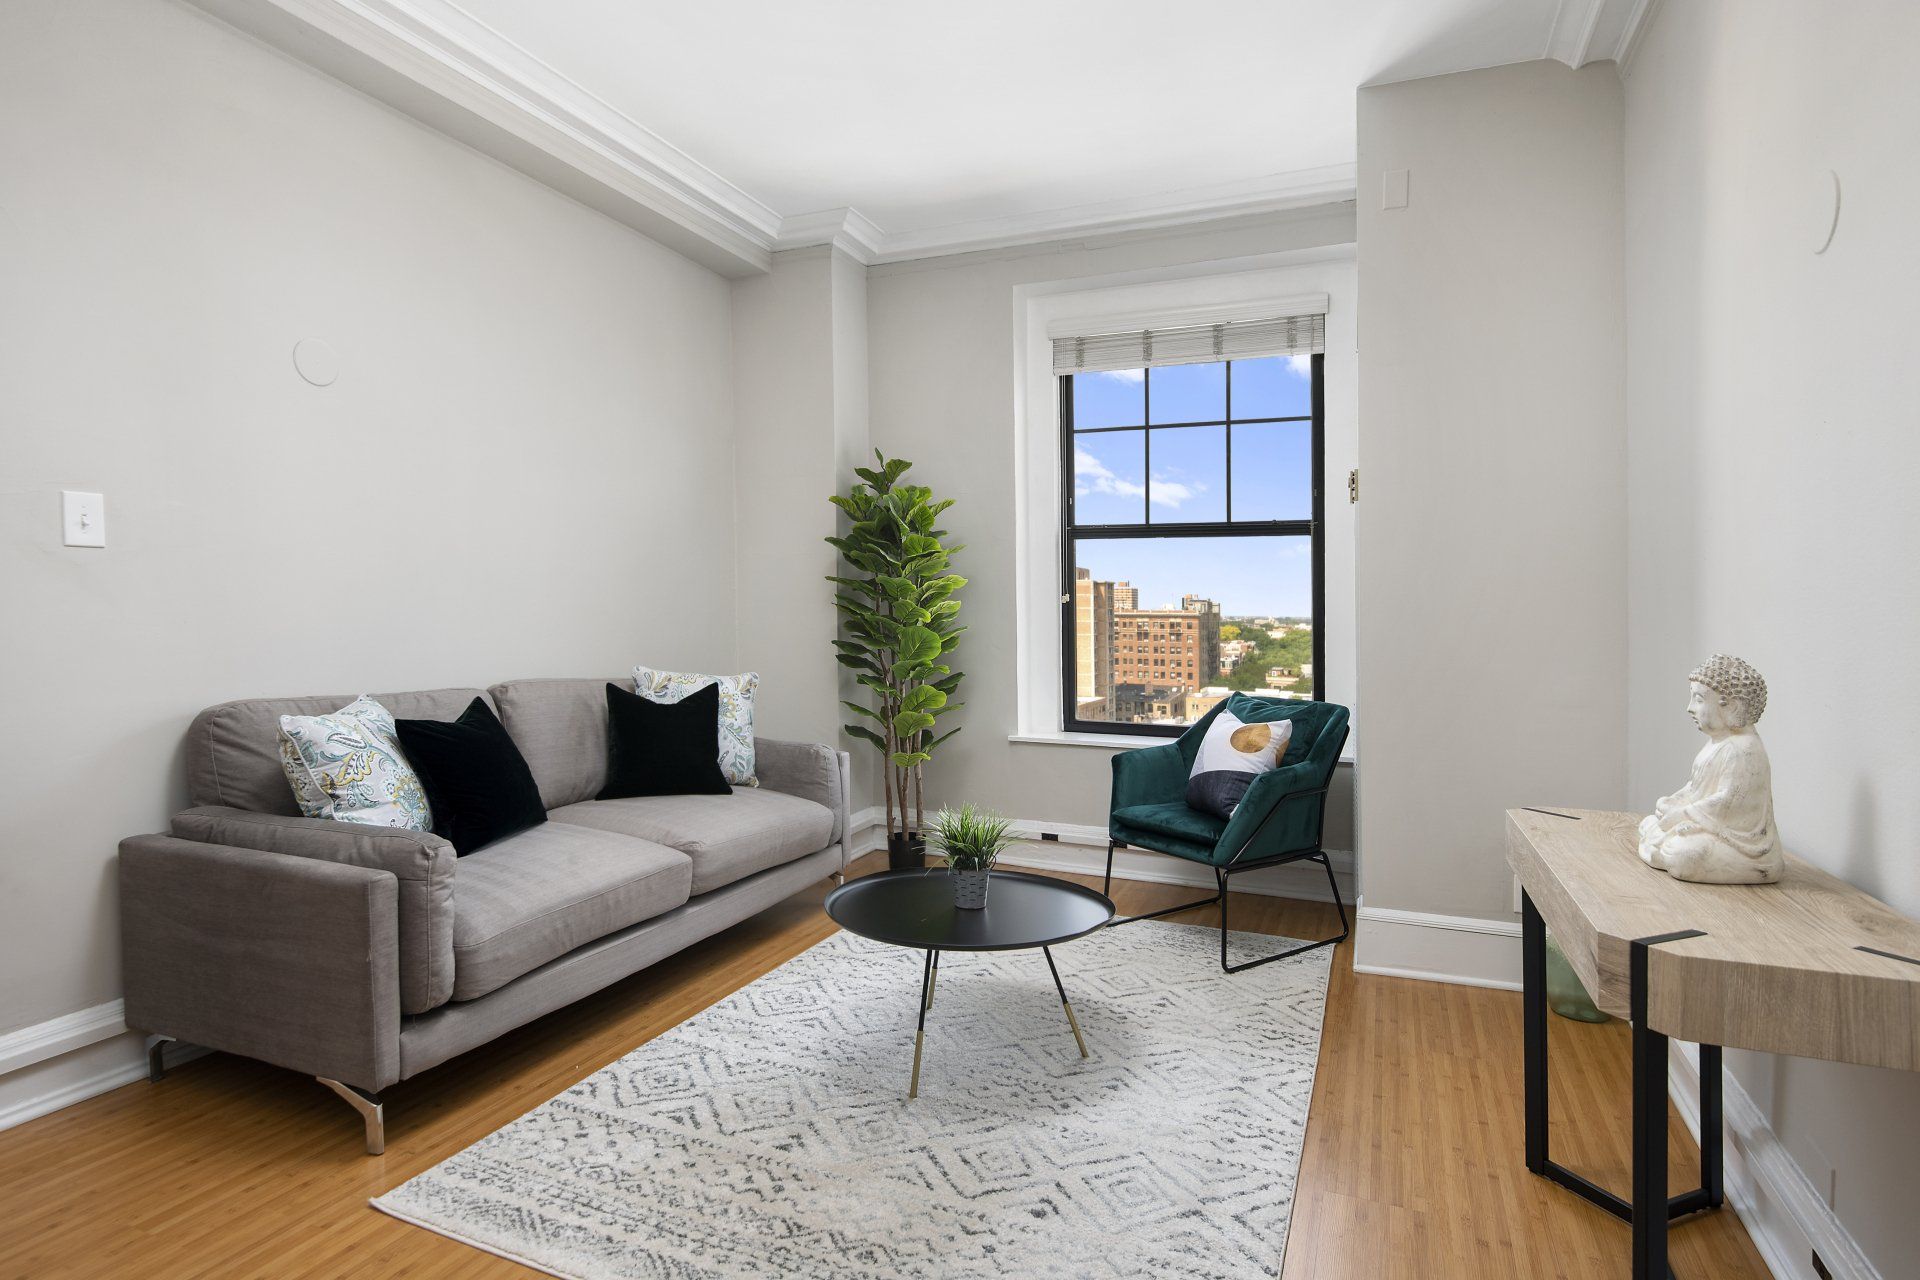 A living room with a couch, chair, table, and window at The Belmont by Reside.